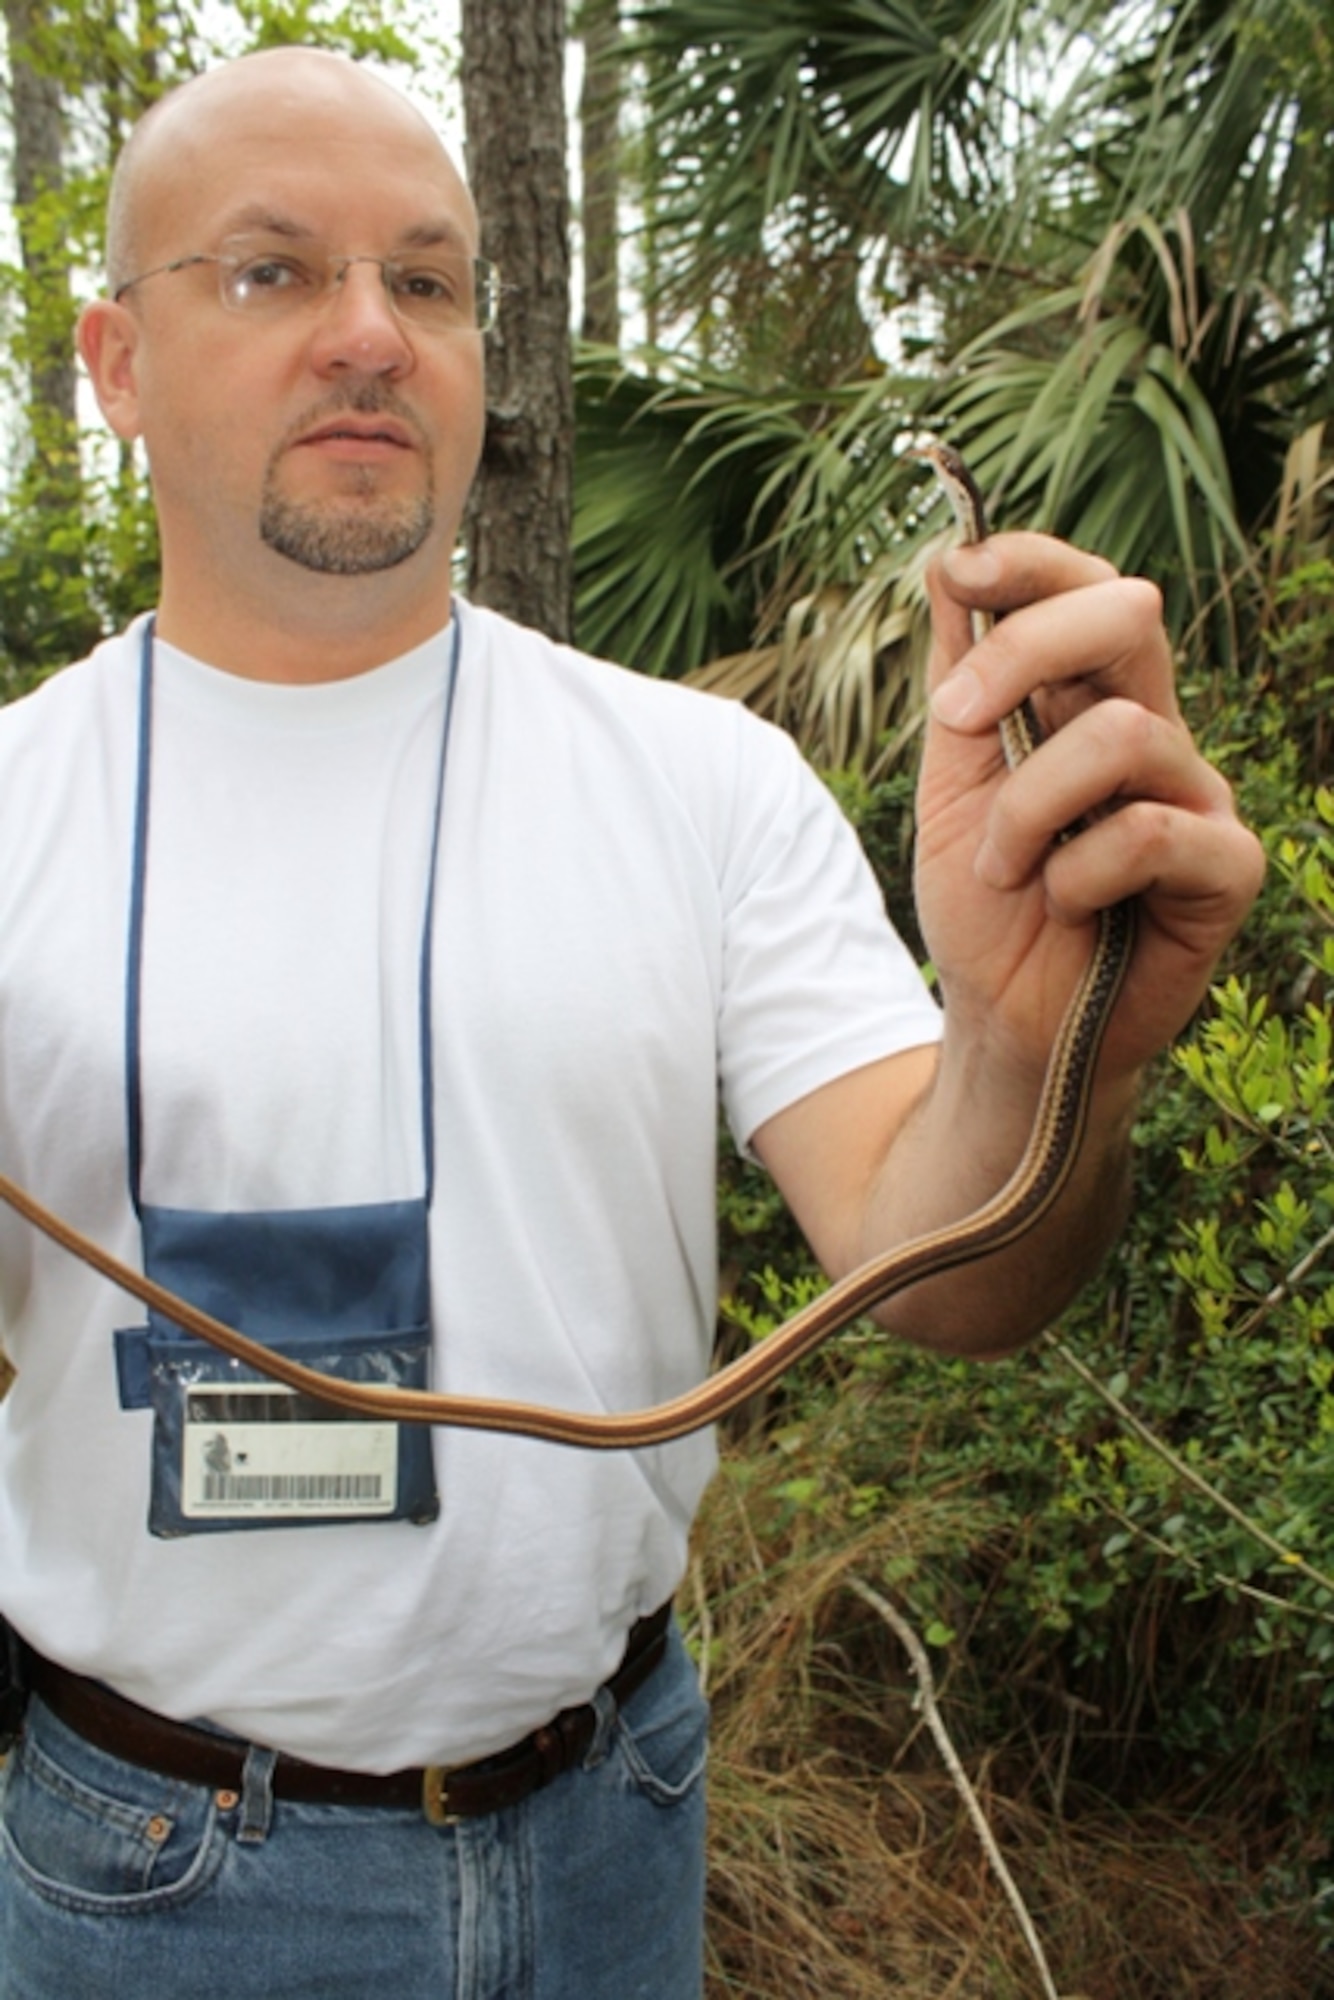 Philip Pruitt, chief of the Asset Environmental Flight of 1st Special Operations Civil Engineer Squadron, holds up a ribbon snake in Hurlburt Field, Fla, in this recent photo. Ribbon snakes are among the more than three dozen species of snakes that are native to this part of Florida. (Courtesy photo)